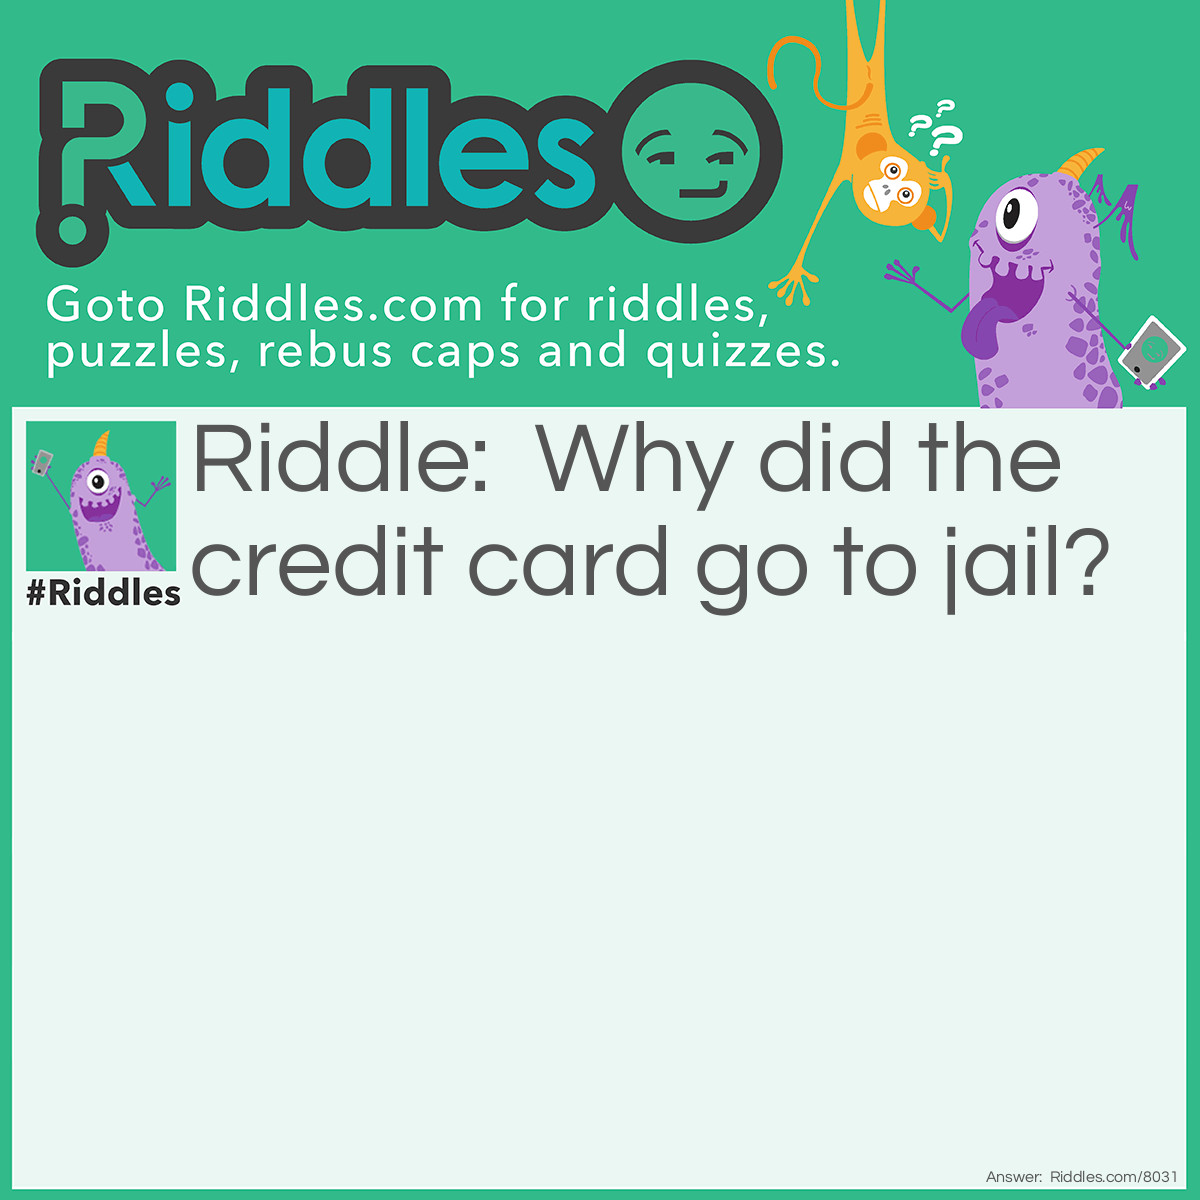 Riddle: Why did the credit card go to jail? Answer: It was guilty as charged.